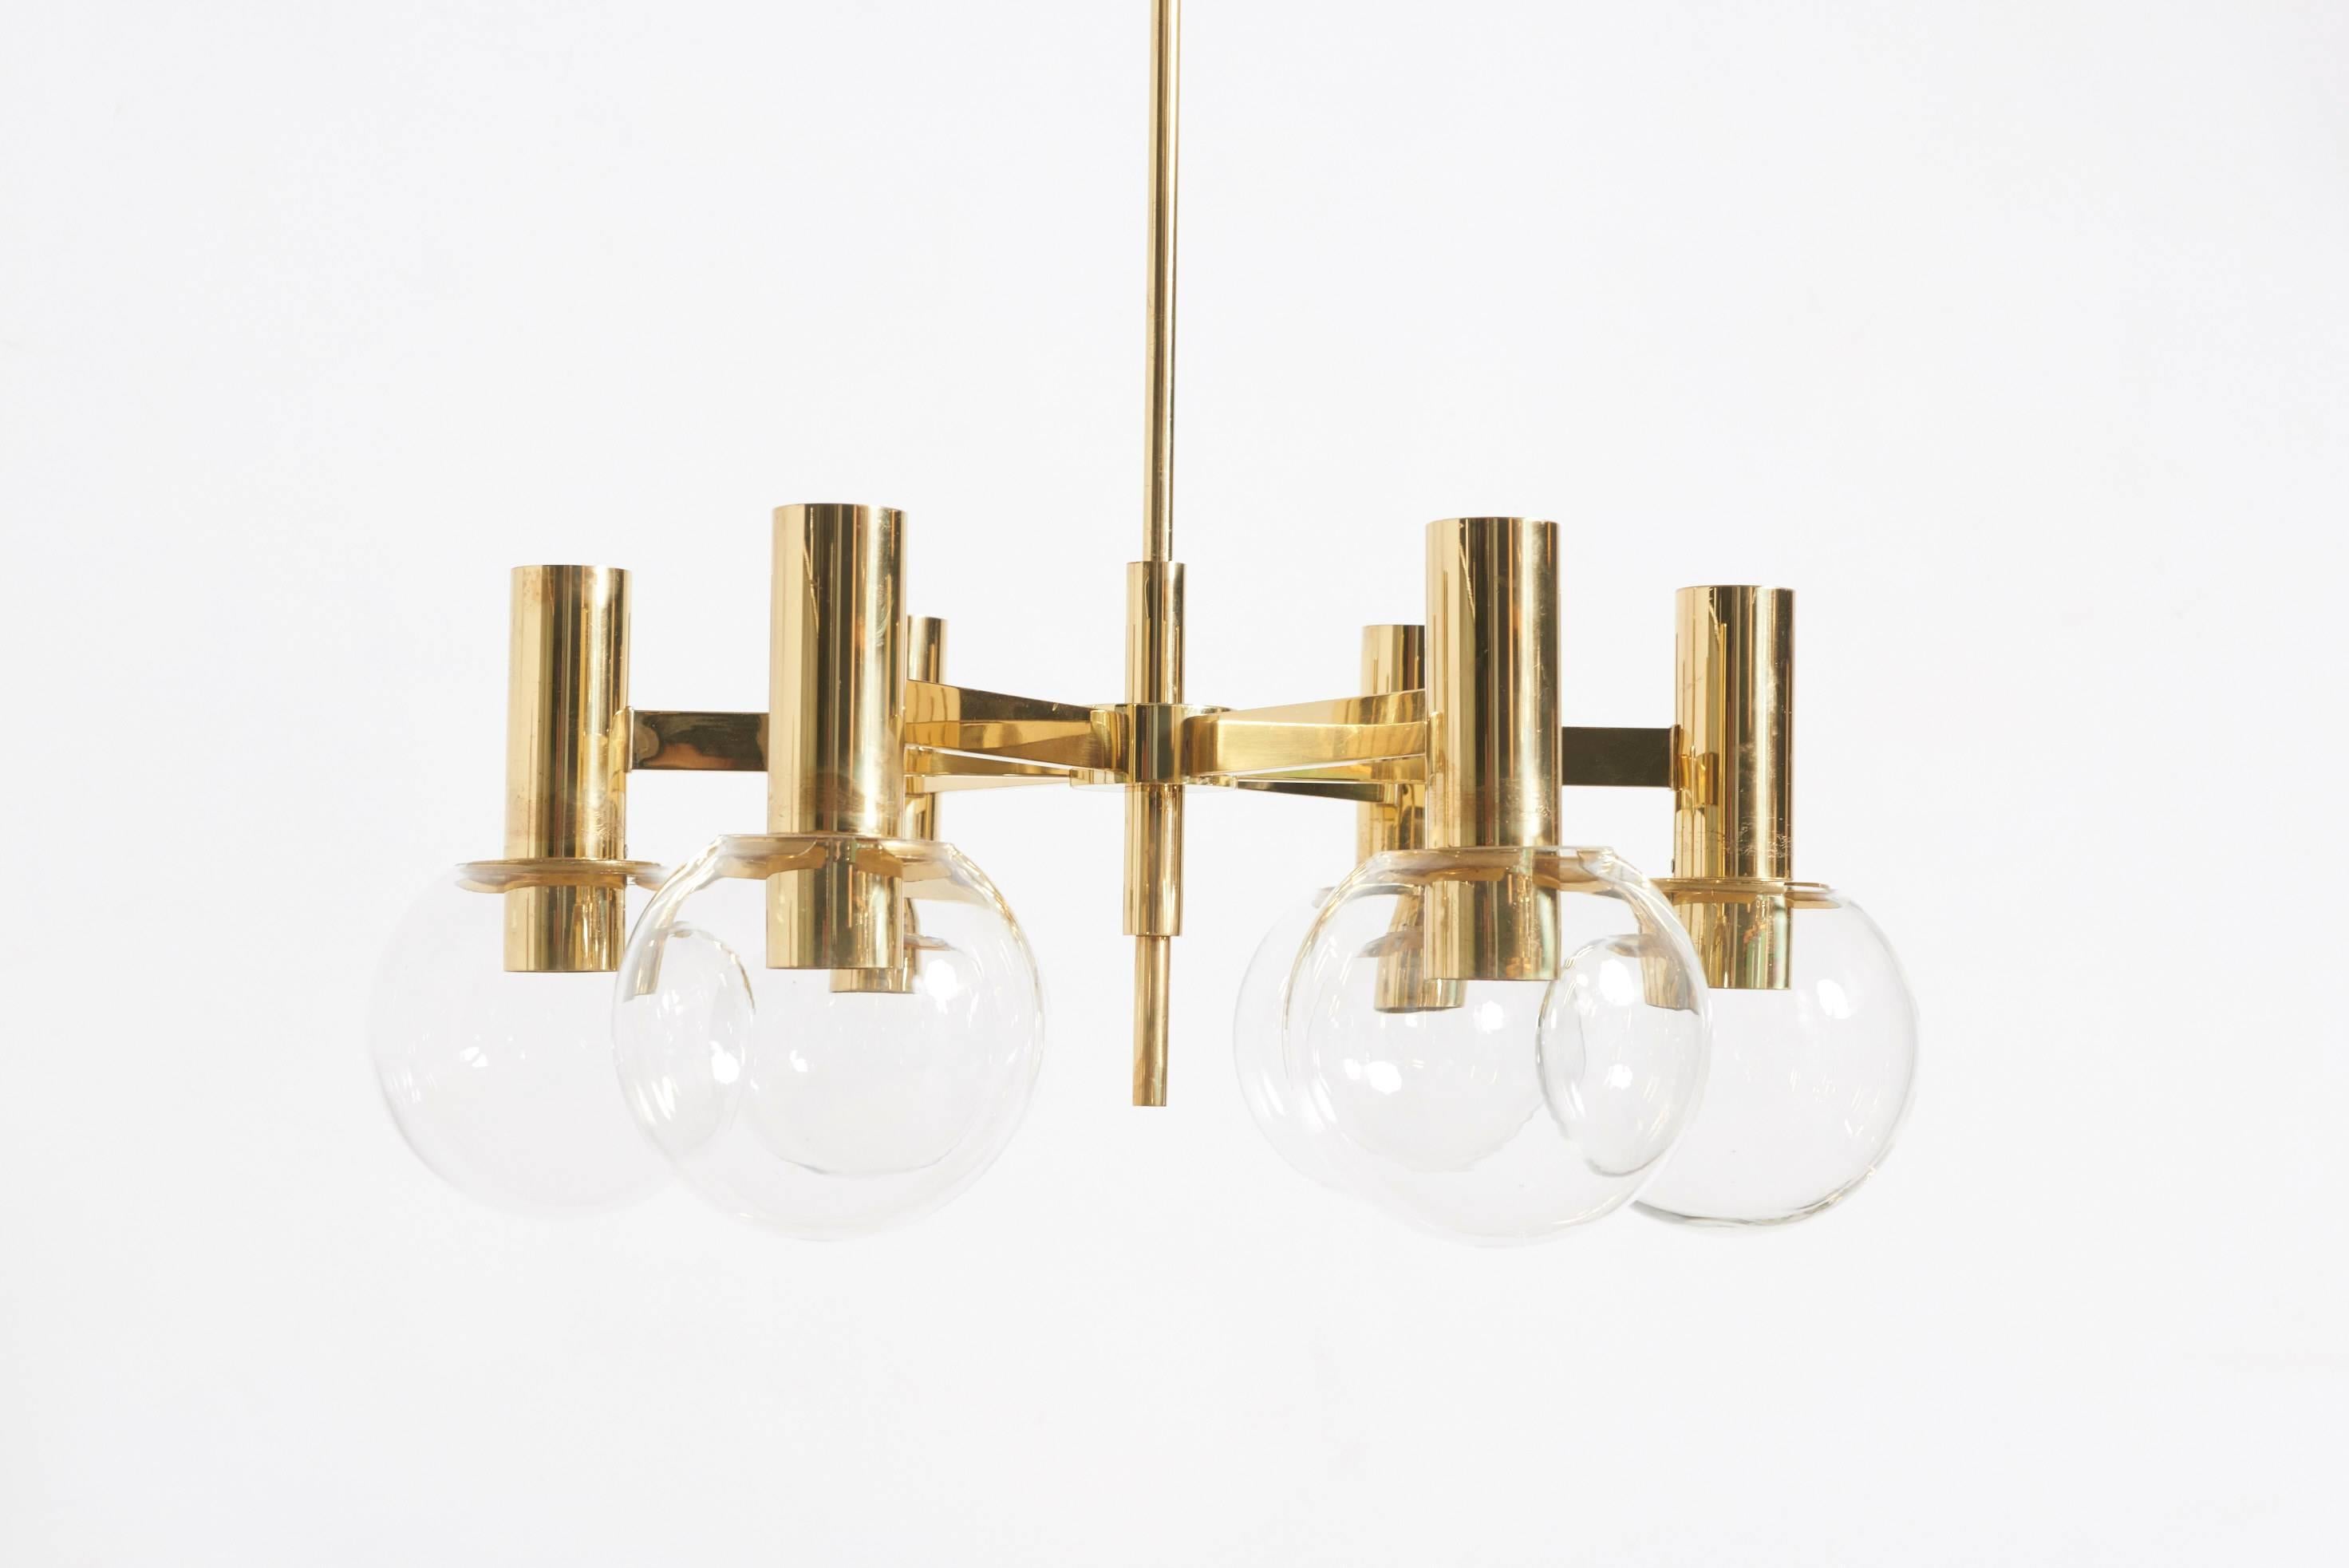 A large and impressive six-armed chandelier in brass with clear glass shades designed by Hans-Agne Jakobsson for Hans-Agne Jakobsson AB, Markaryd, Sweden.


Hans-Agne Jakobsson was one of the world’s most versatile and productive lighting